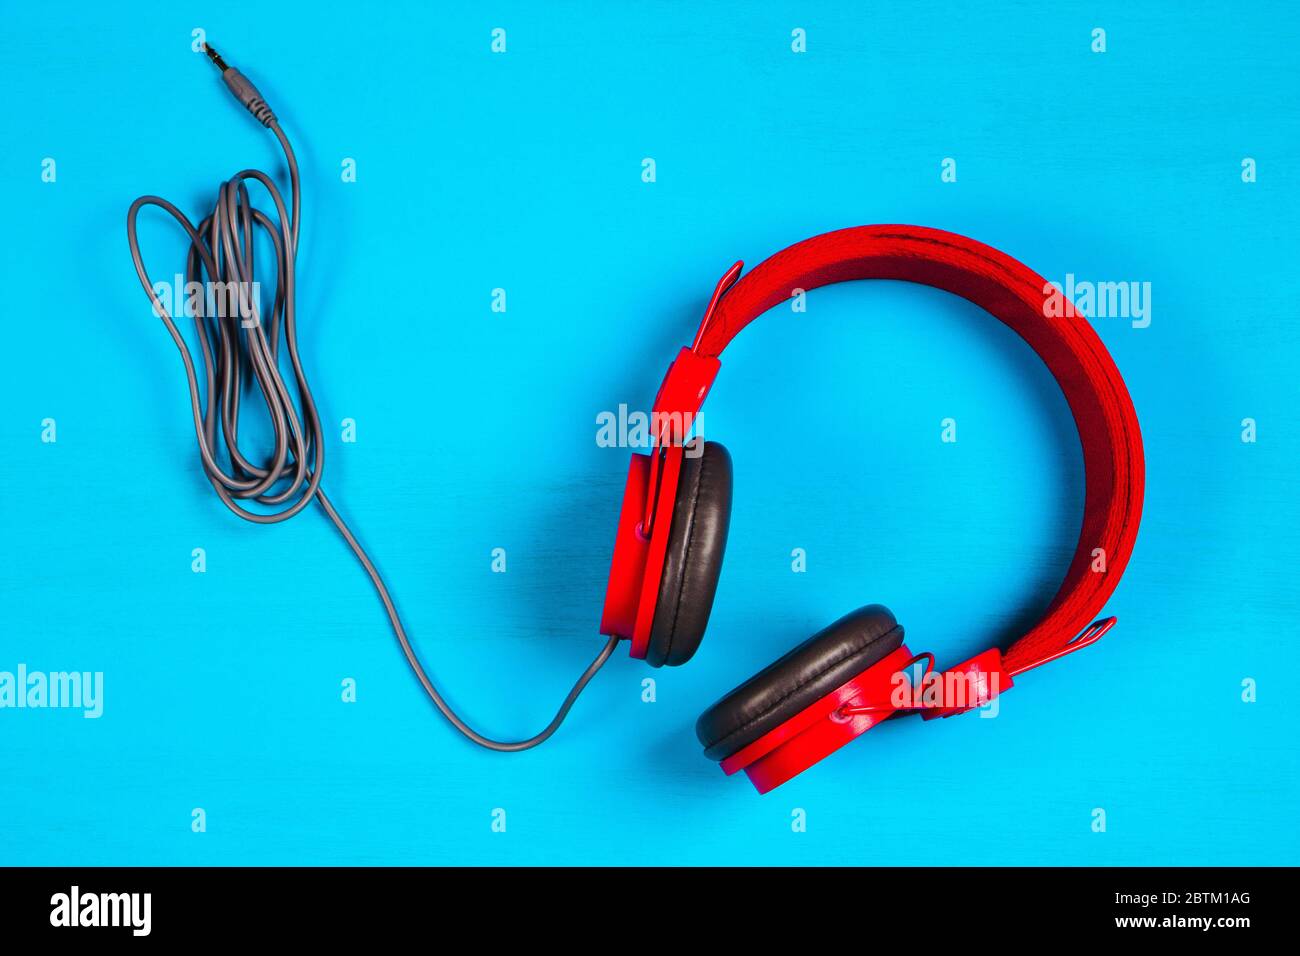 Red headphones on blue background. Music concept Stock Photo